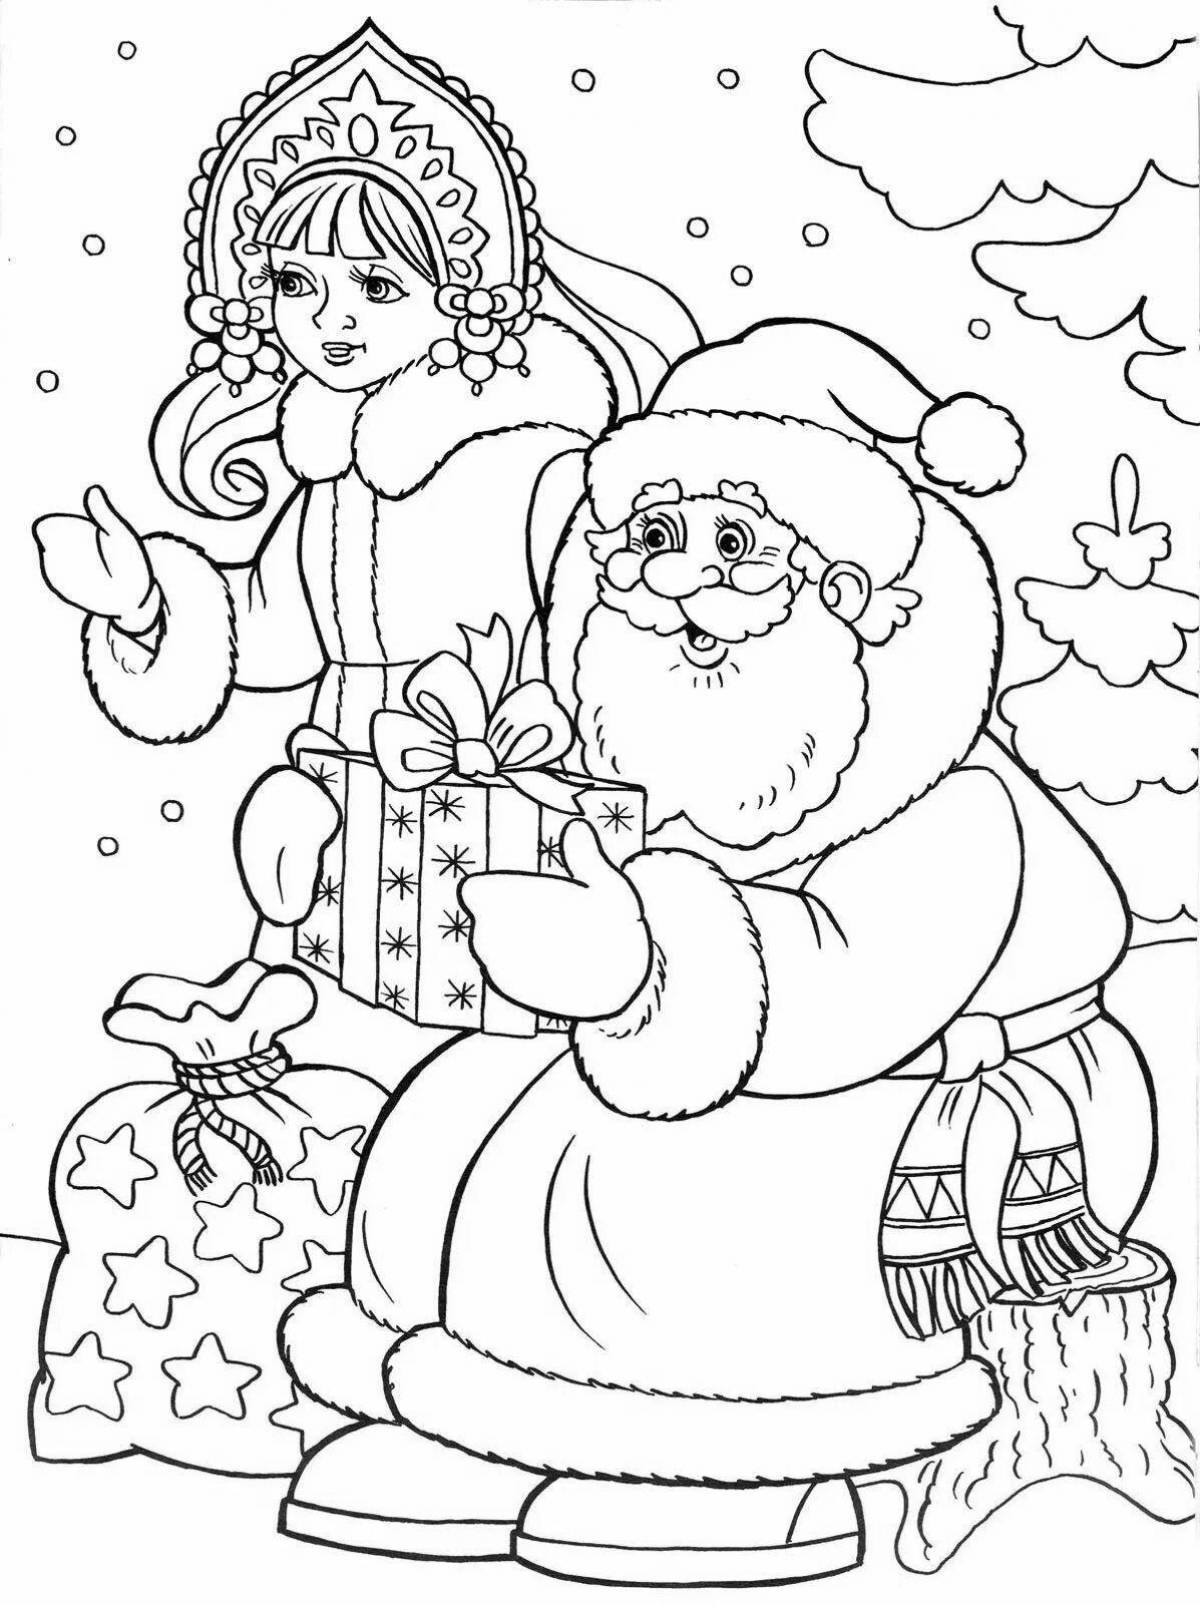 Coloring Santa Claus and Snow Maiden